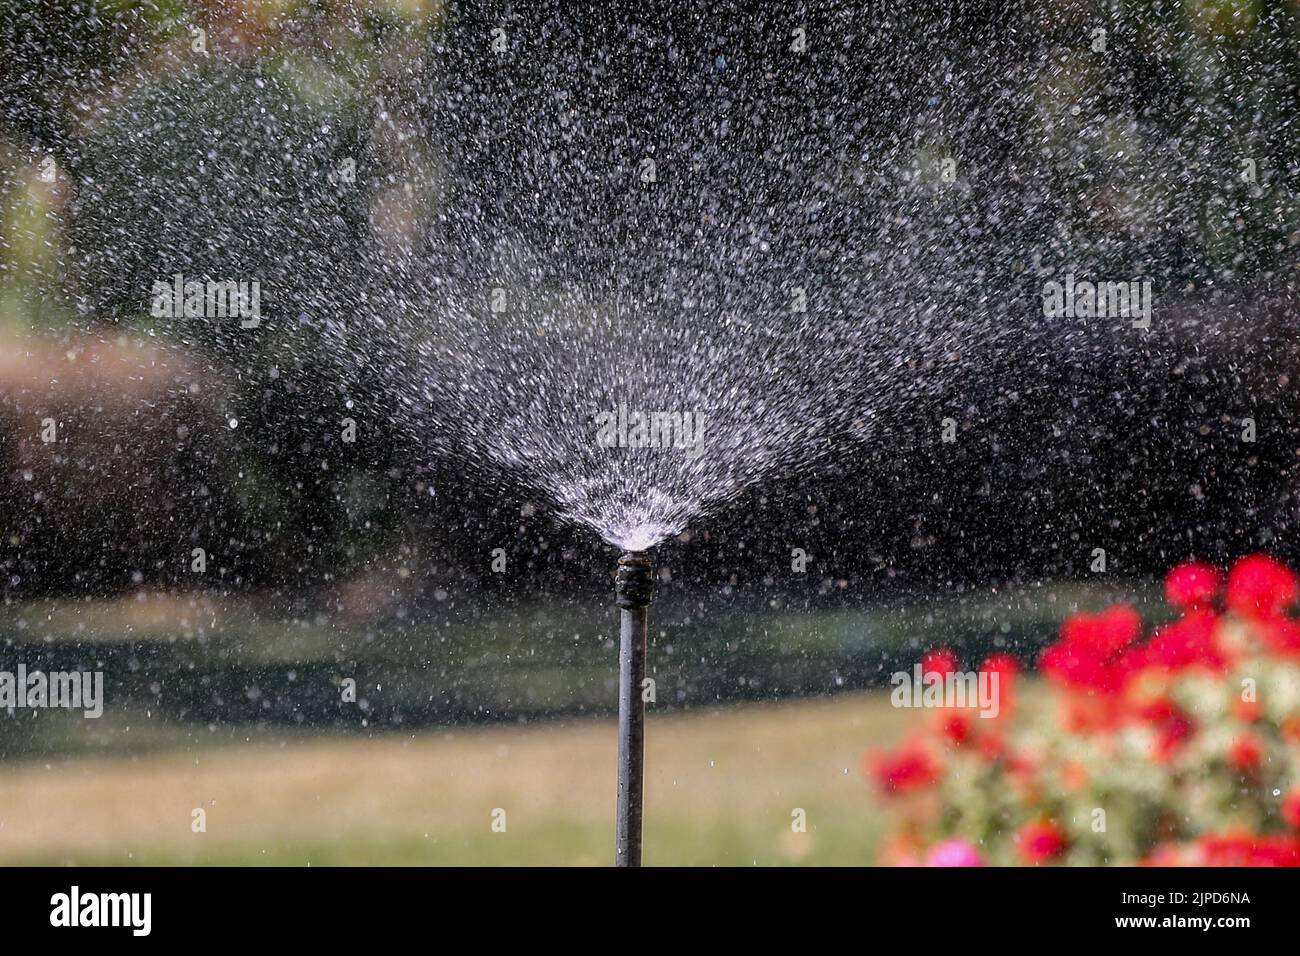 London, UK. 11th Aug, 2022. A sprinkler seen watering flowers in London.Thames Water has announced that a hosepipe and sprinkler ban will come into force from 24 August 2022 that will affect over 10 million customers across the south of England. (Credit Image: © Dinendra Haria/SOPA Images via ZUMA Press Wire) Stock Photo